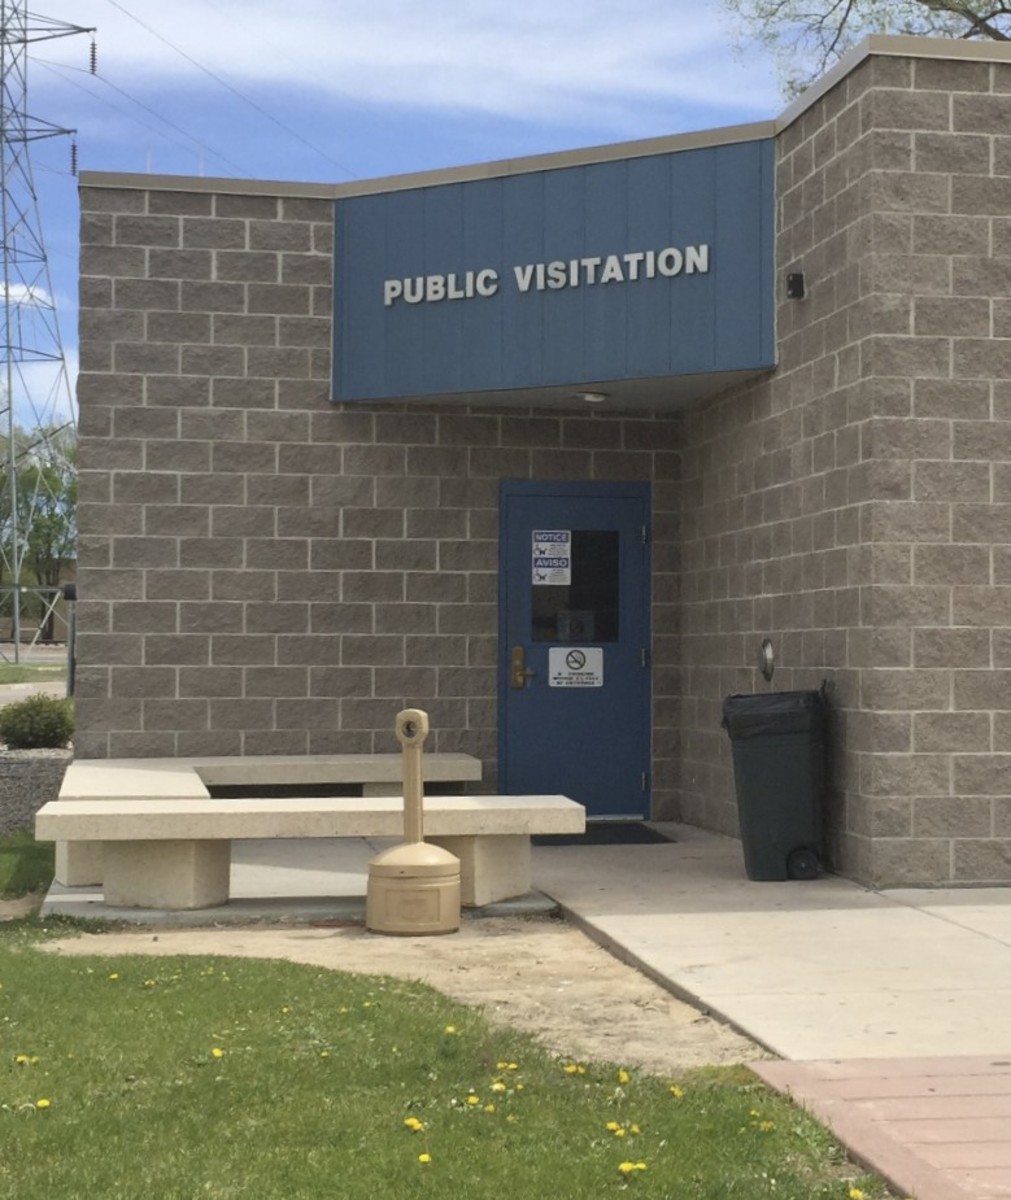 What to Expect: Visitation at the El Paso County (Colorado) Criminal Justice Center (CJC)